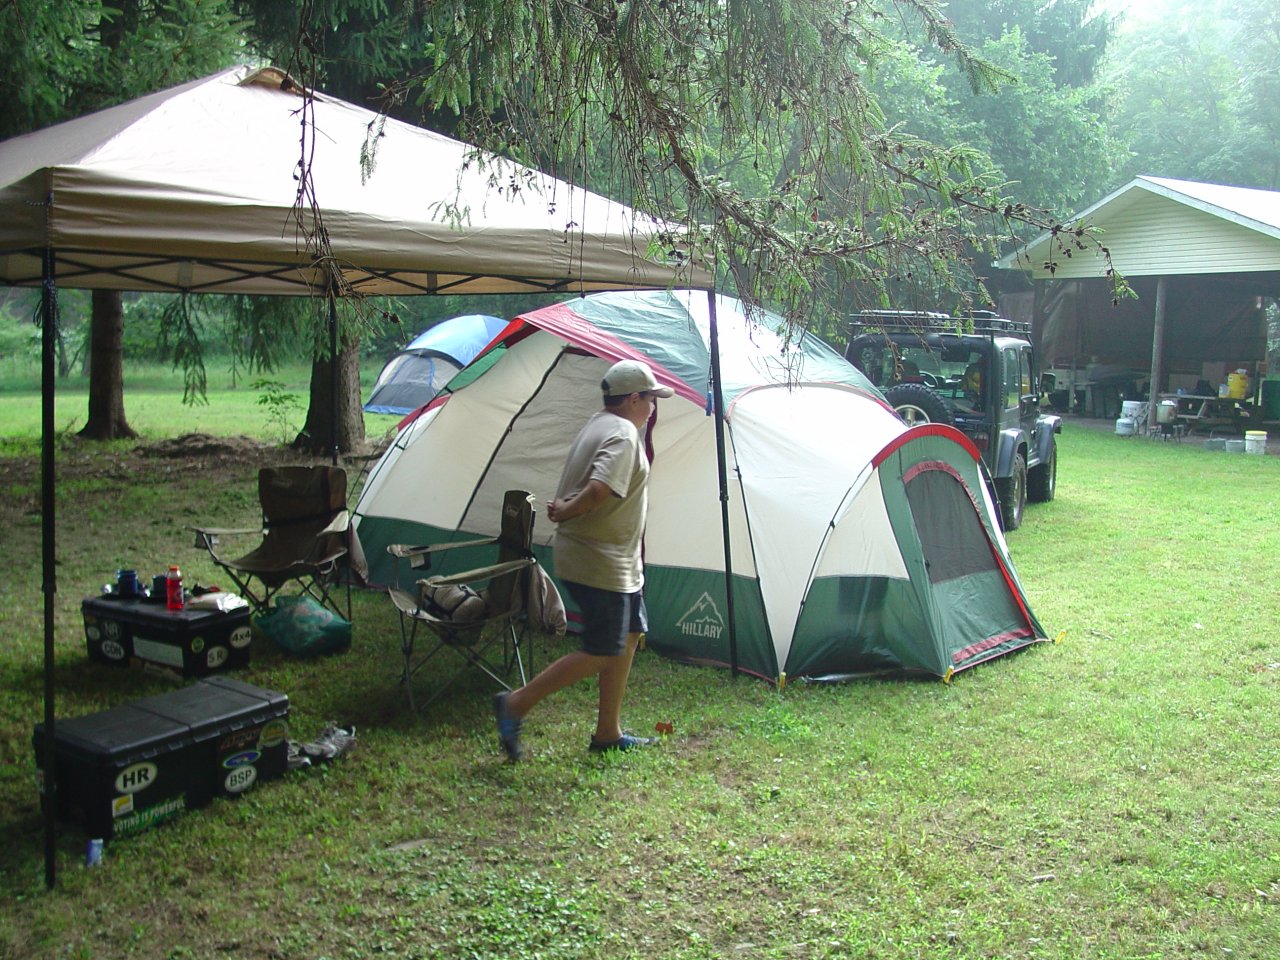 Our Camp at Peterkin